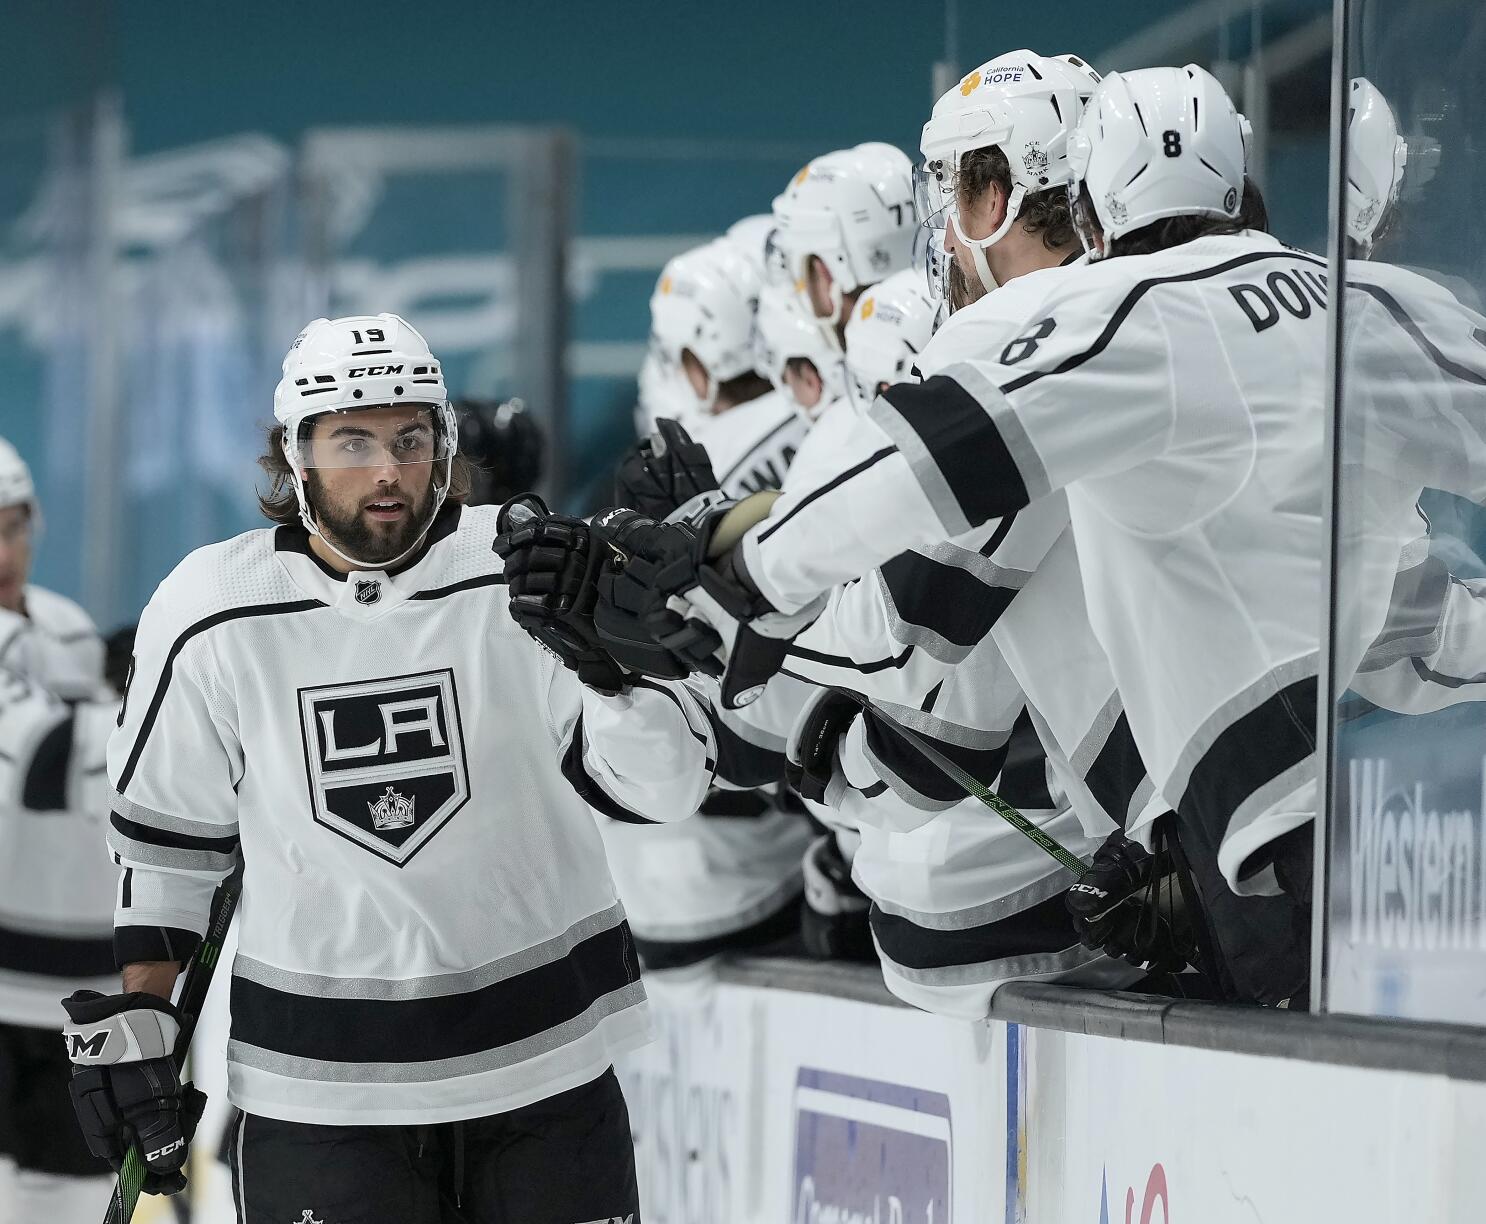 Video: An interview with 18-year-old Justin Williams - LA Kings